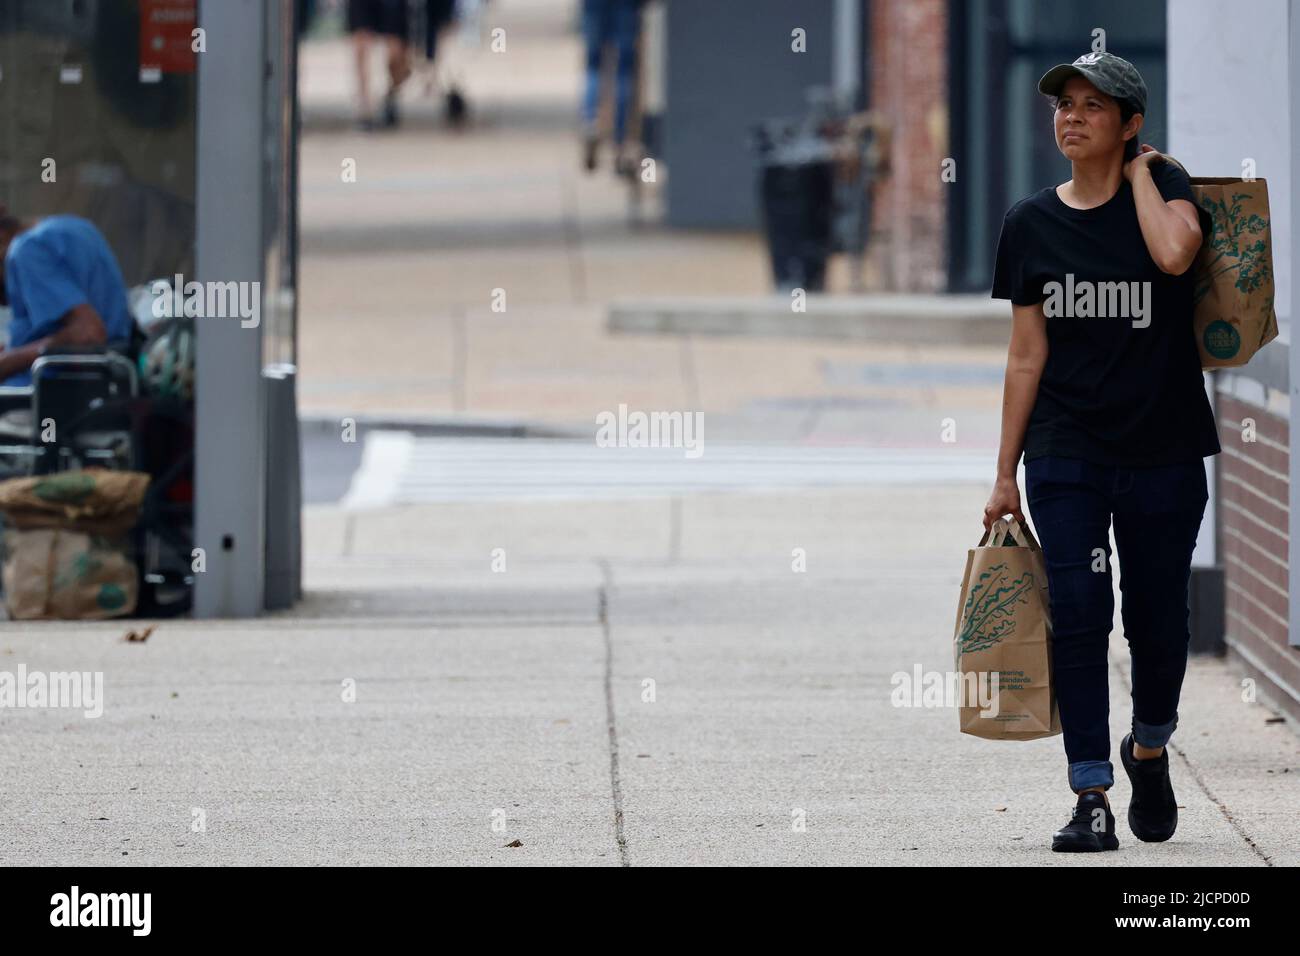 Washington, DC, USA. 14th June, 2022. A woman walks on the street after shopping at a supermarket in Washington, DC, the United States, on June 14, 2022. The U.S. Labor Department reported on Tuesday that producer prices surged 10.8 percent year on year in May, the latest sign of mounting inflation pressure, which could prompt the Federal Reserve to raise rates more aggressively. Credit: Ting Shen/Xinhua/Alamy Live News Stock Photo